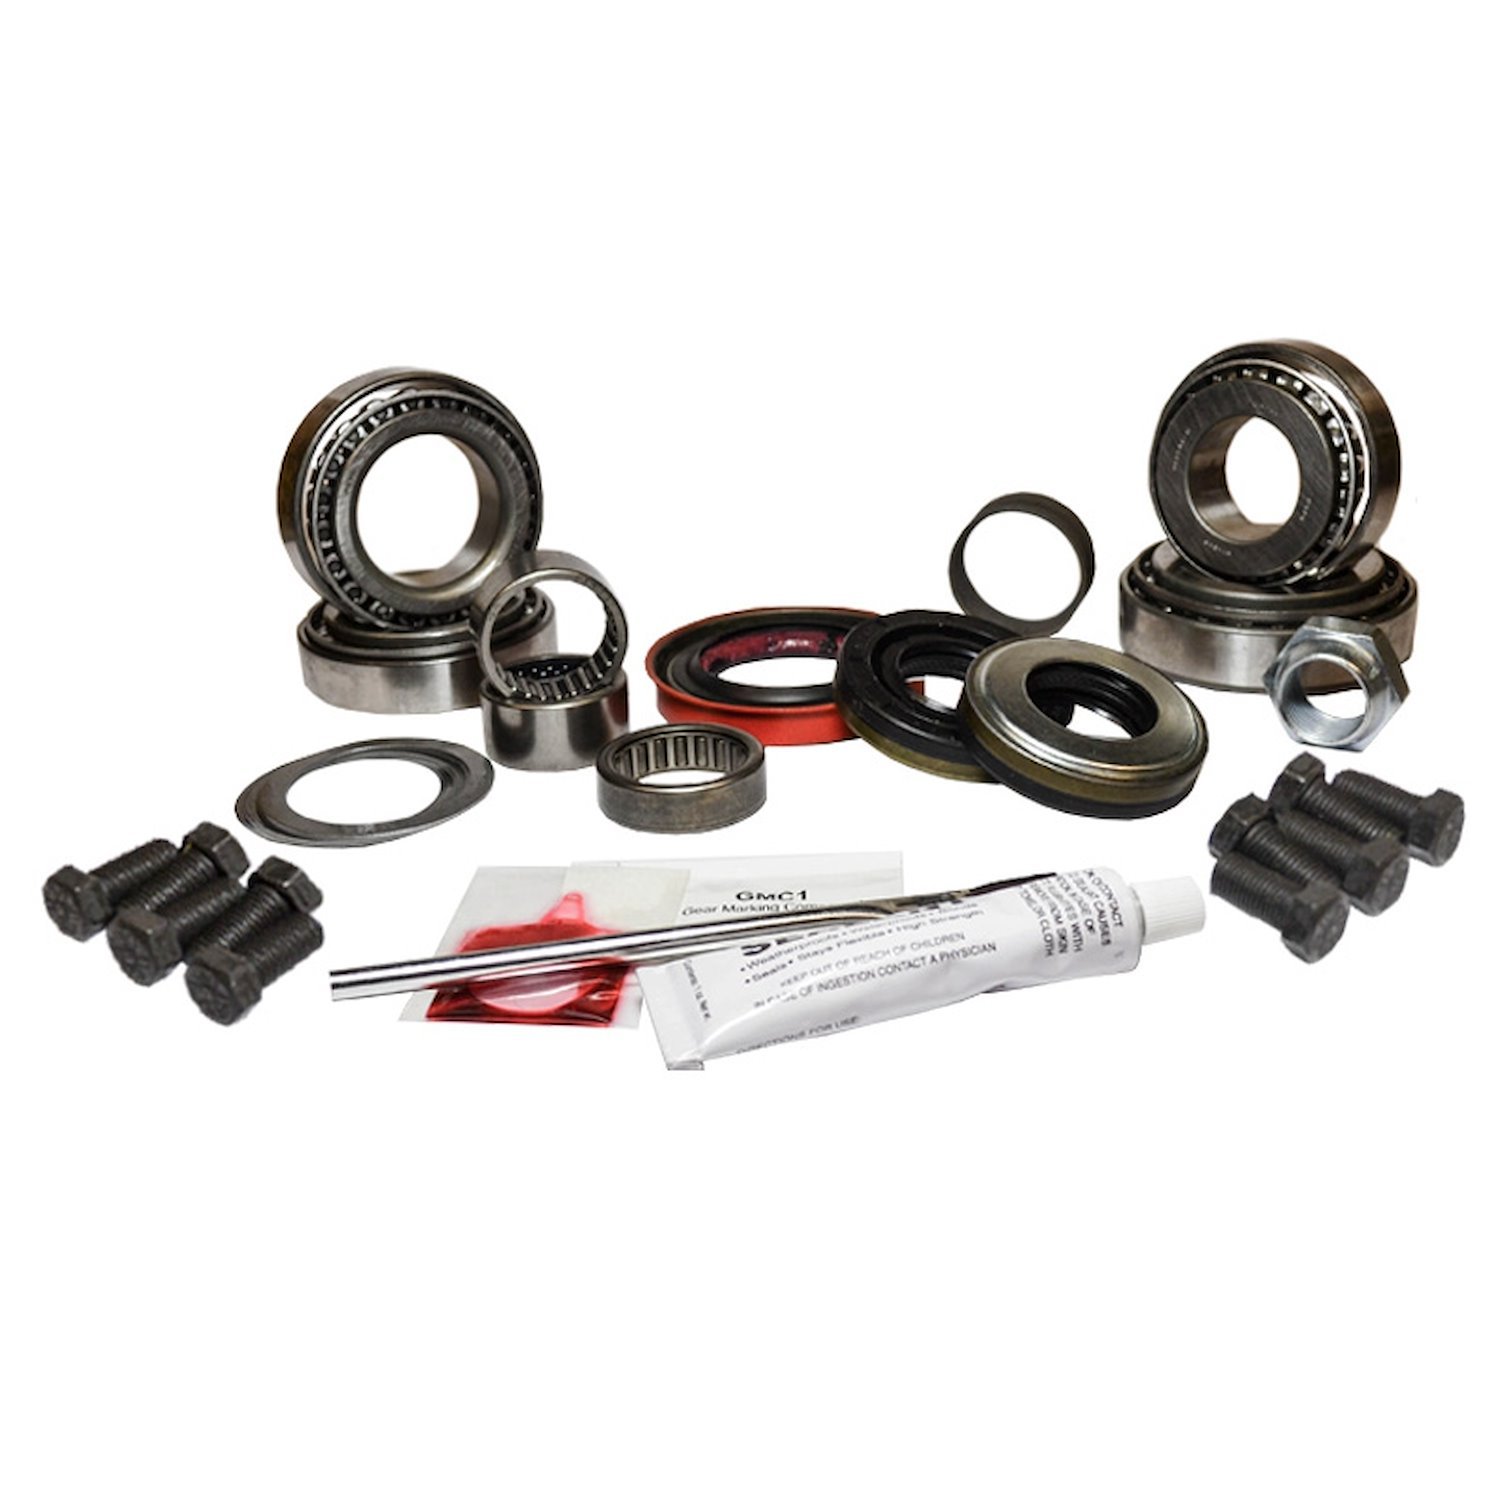 MKGM9.25-SAL GM 9.25 Inch Front Master Install Kit for 2011-2014 Chevy/GMC 2500/3500 HD 4x4